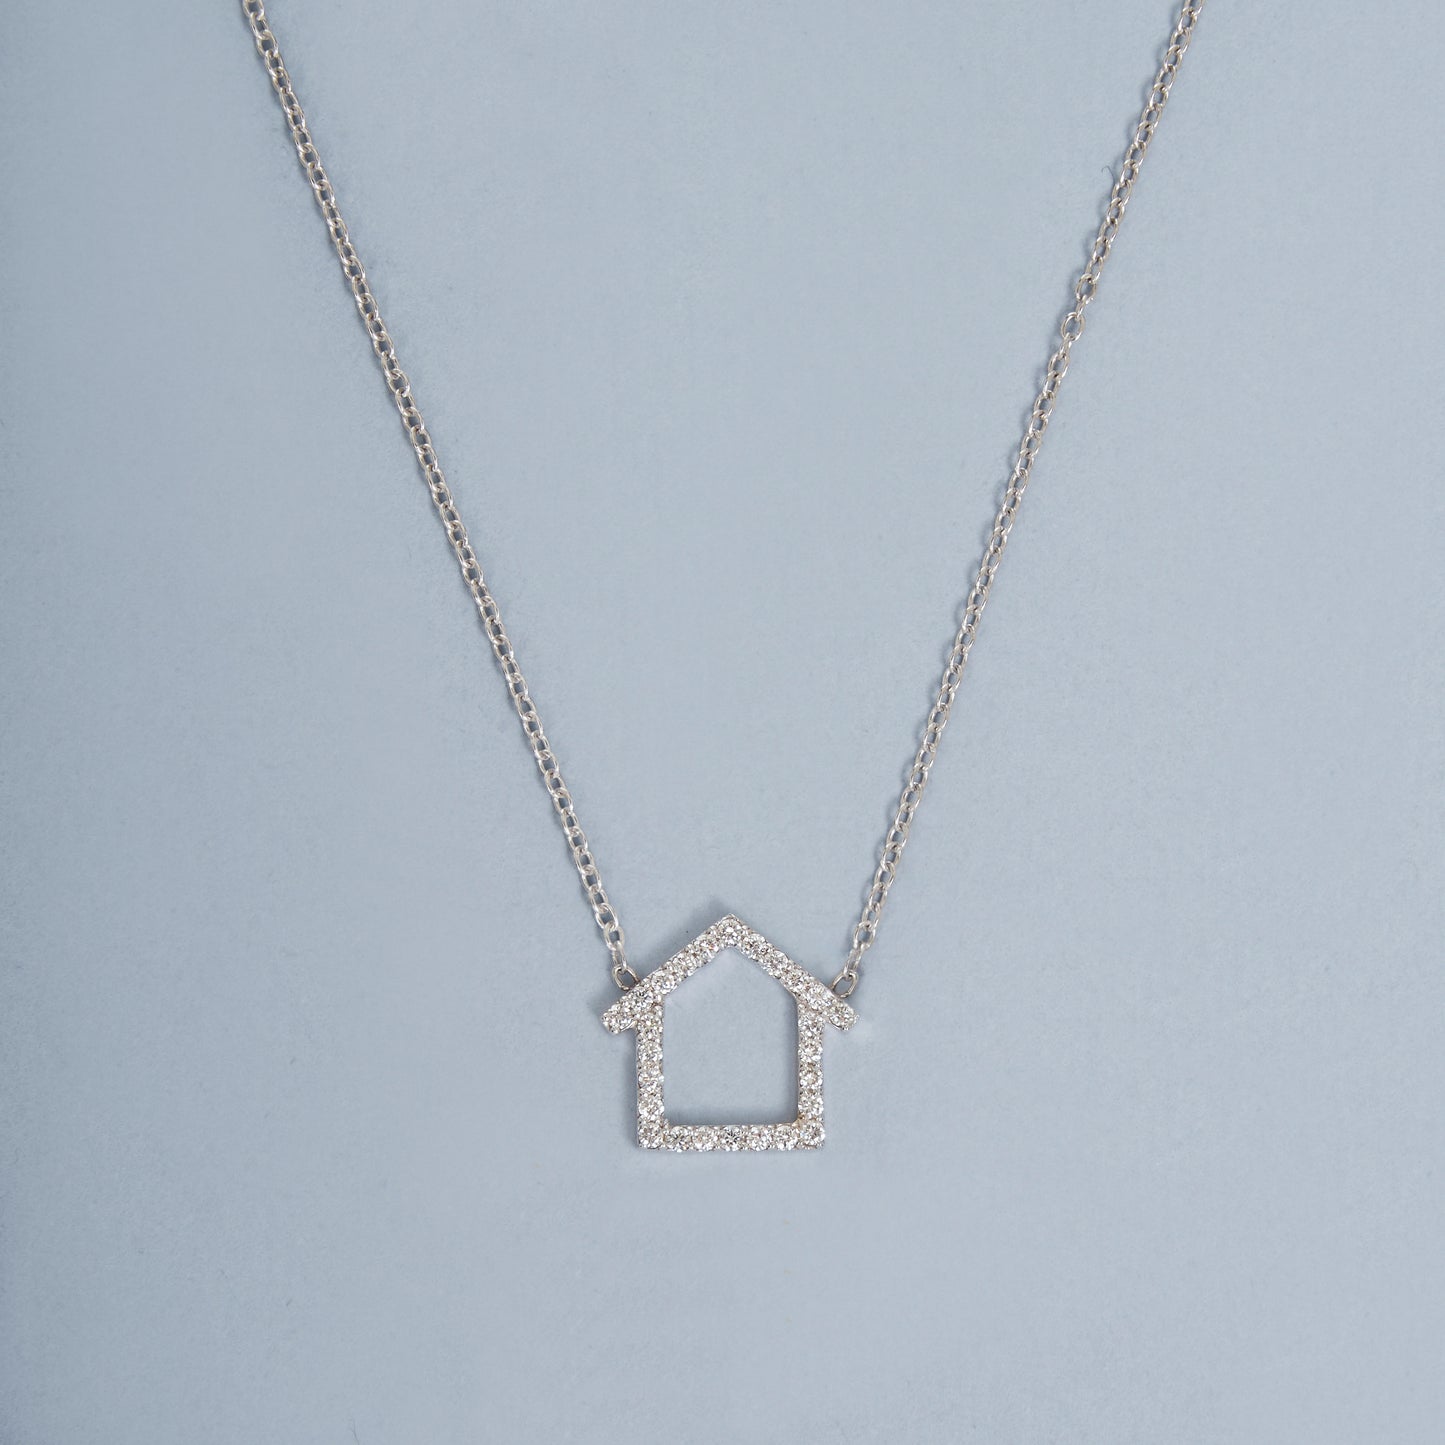 Home Shine Necklace